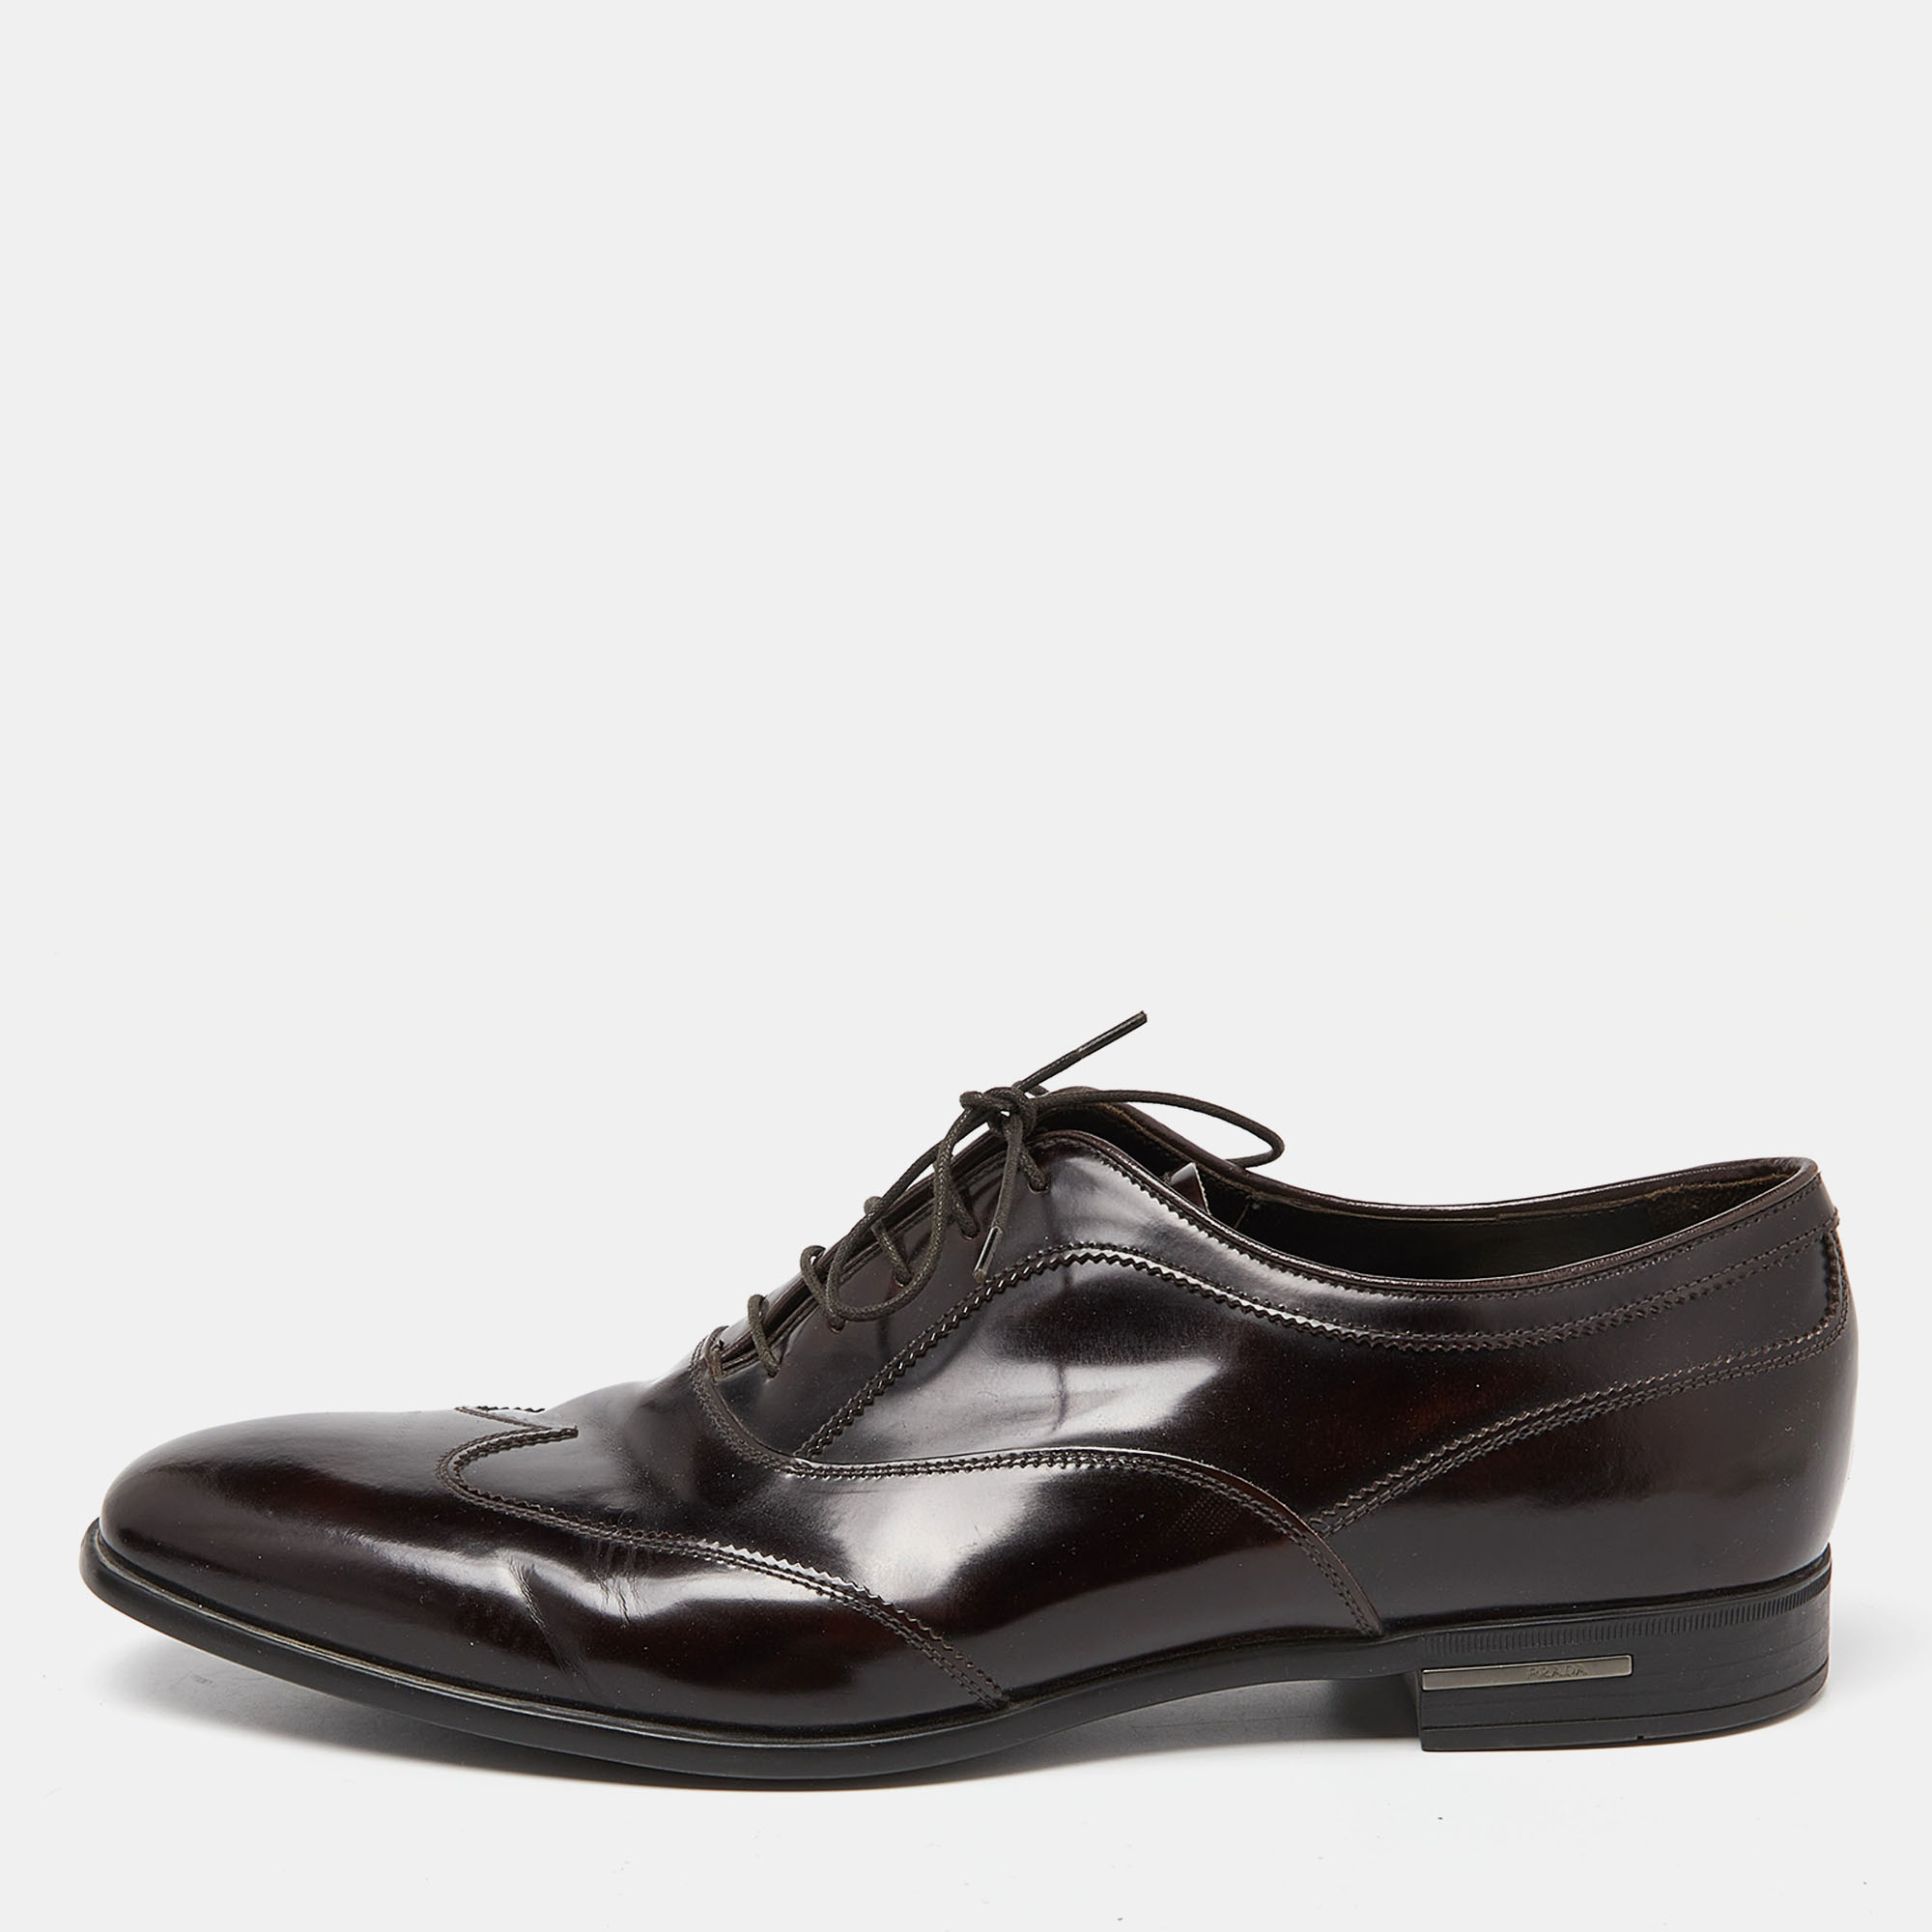 Pre-owned Prada Brown Patent Leather Lace Up Oxfords Size 43.5